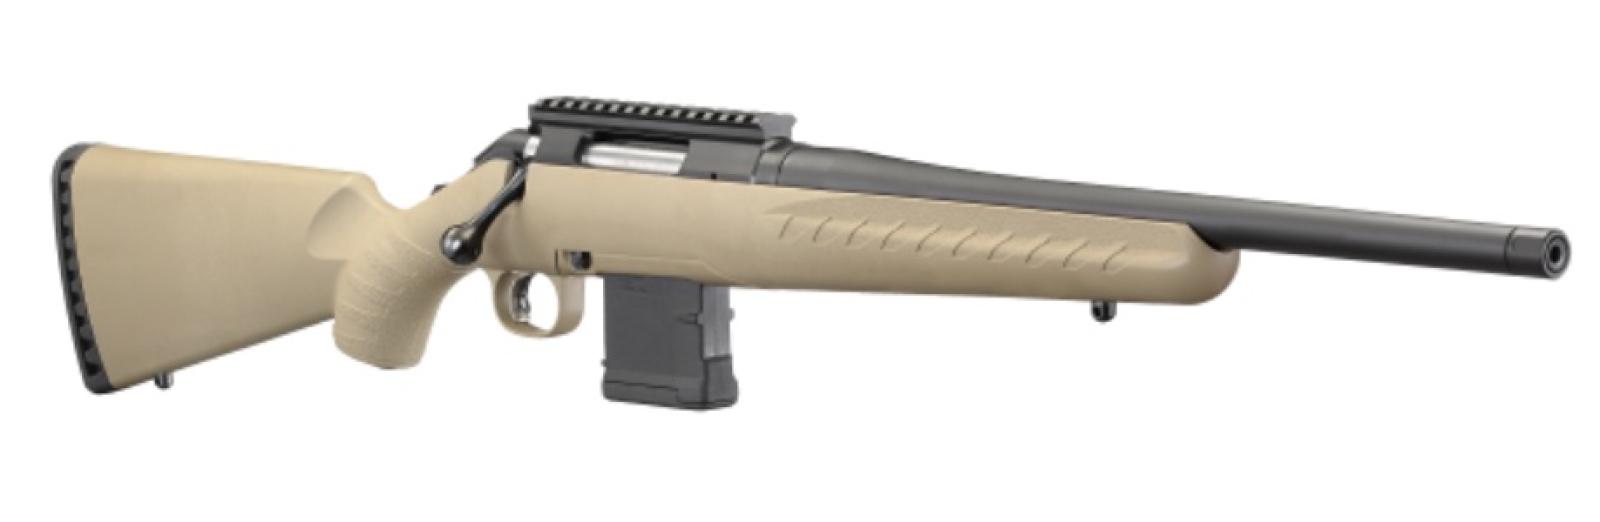 Ruger American Rifle Ranch 5.56 NATO Bolt Action Rifle